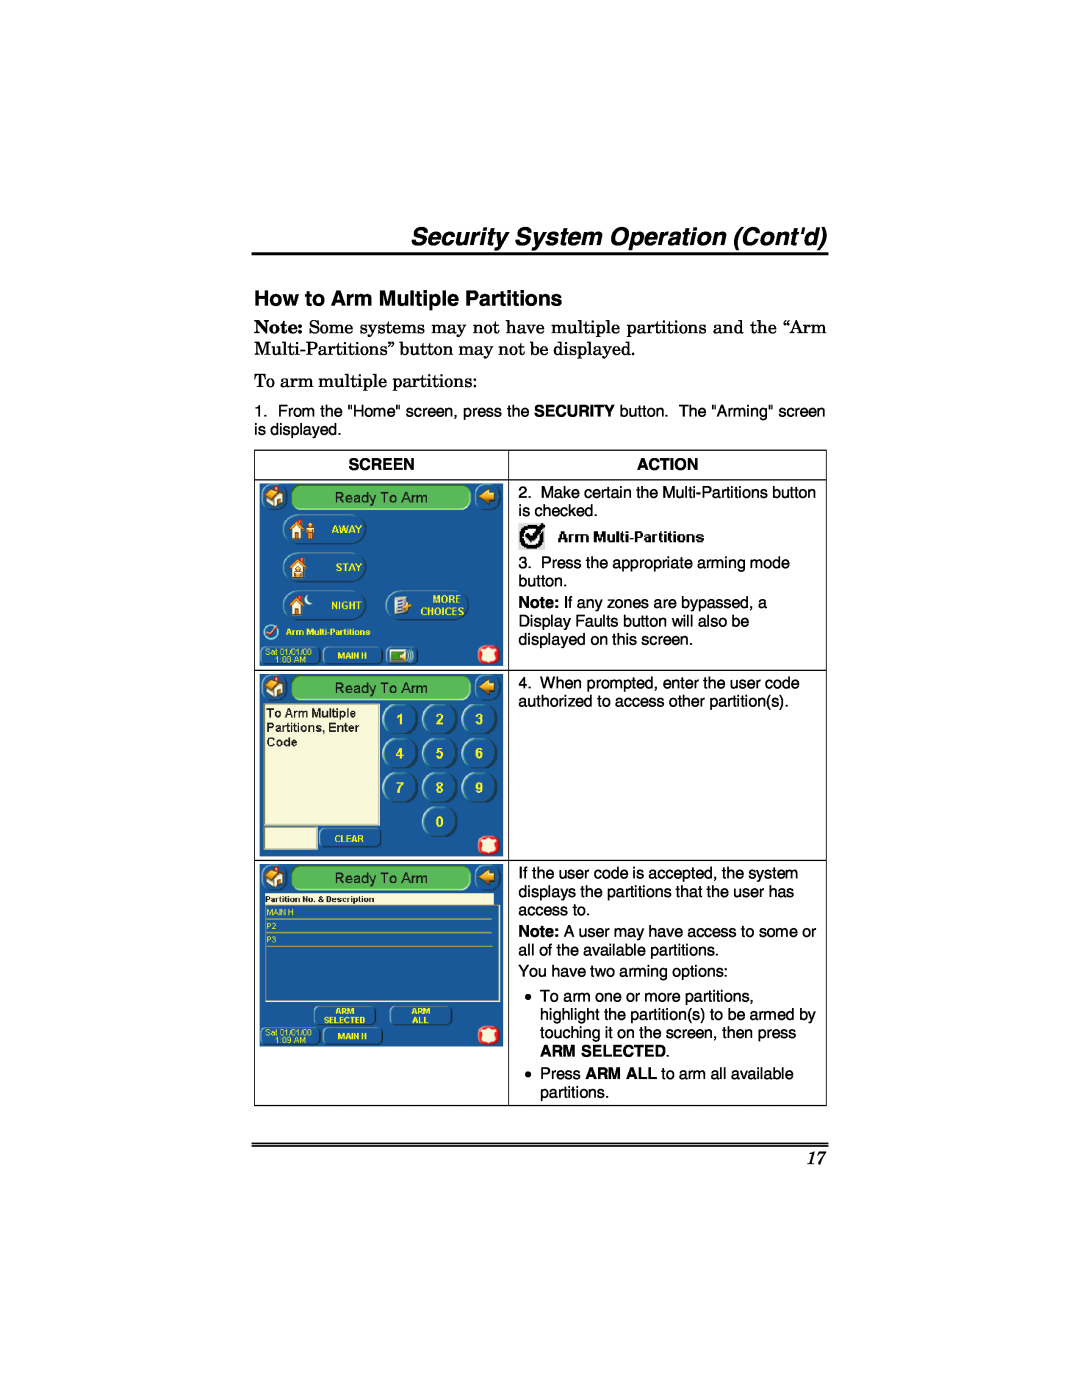 Honeywell 6271 manual Security System Operation Contd, How to Arm Multiple Partitions, Screen, Action, Arm Selected 